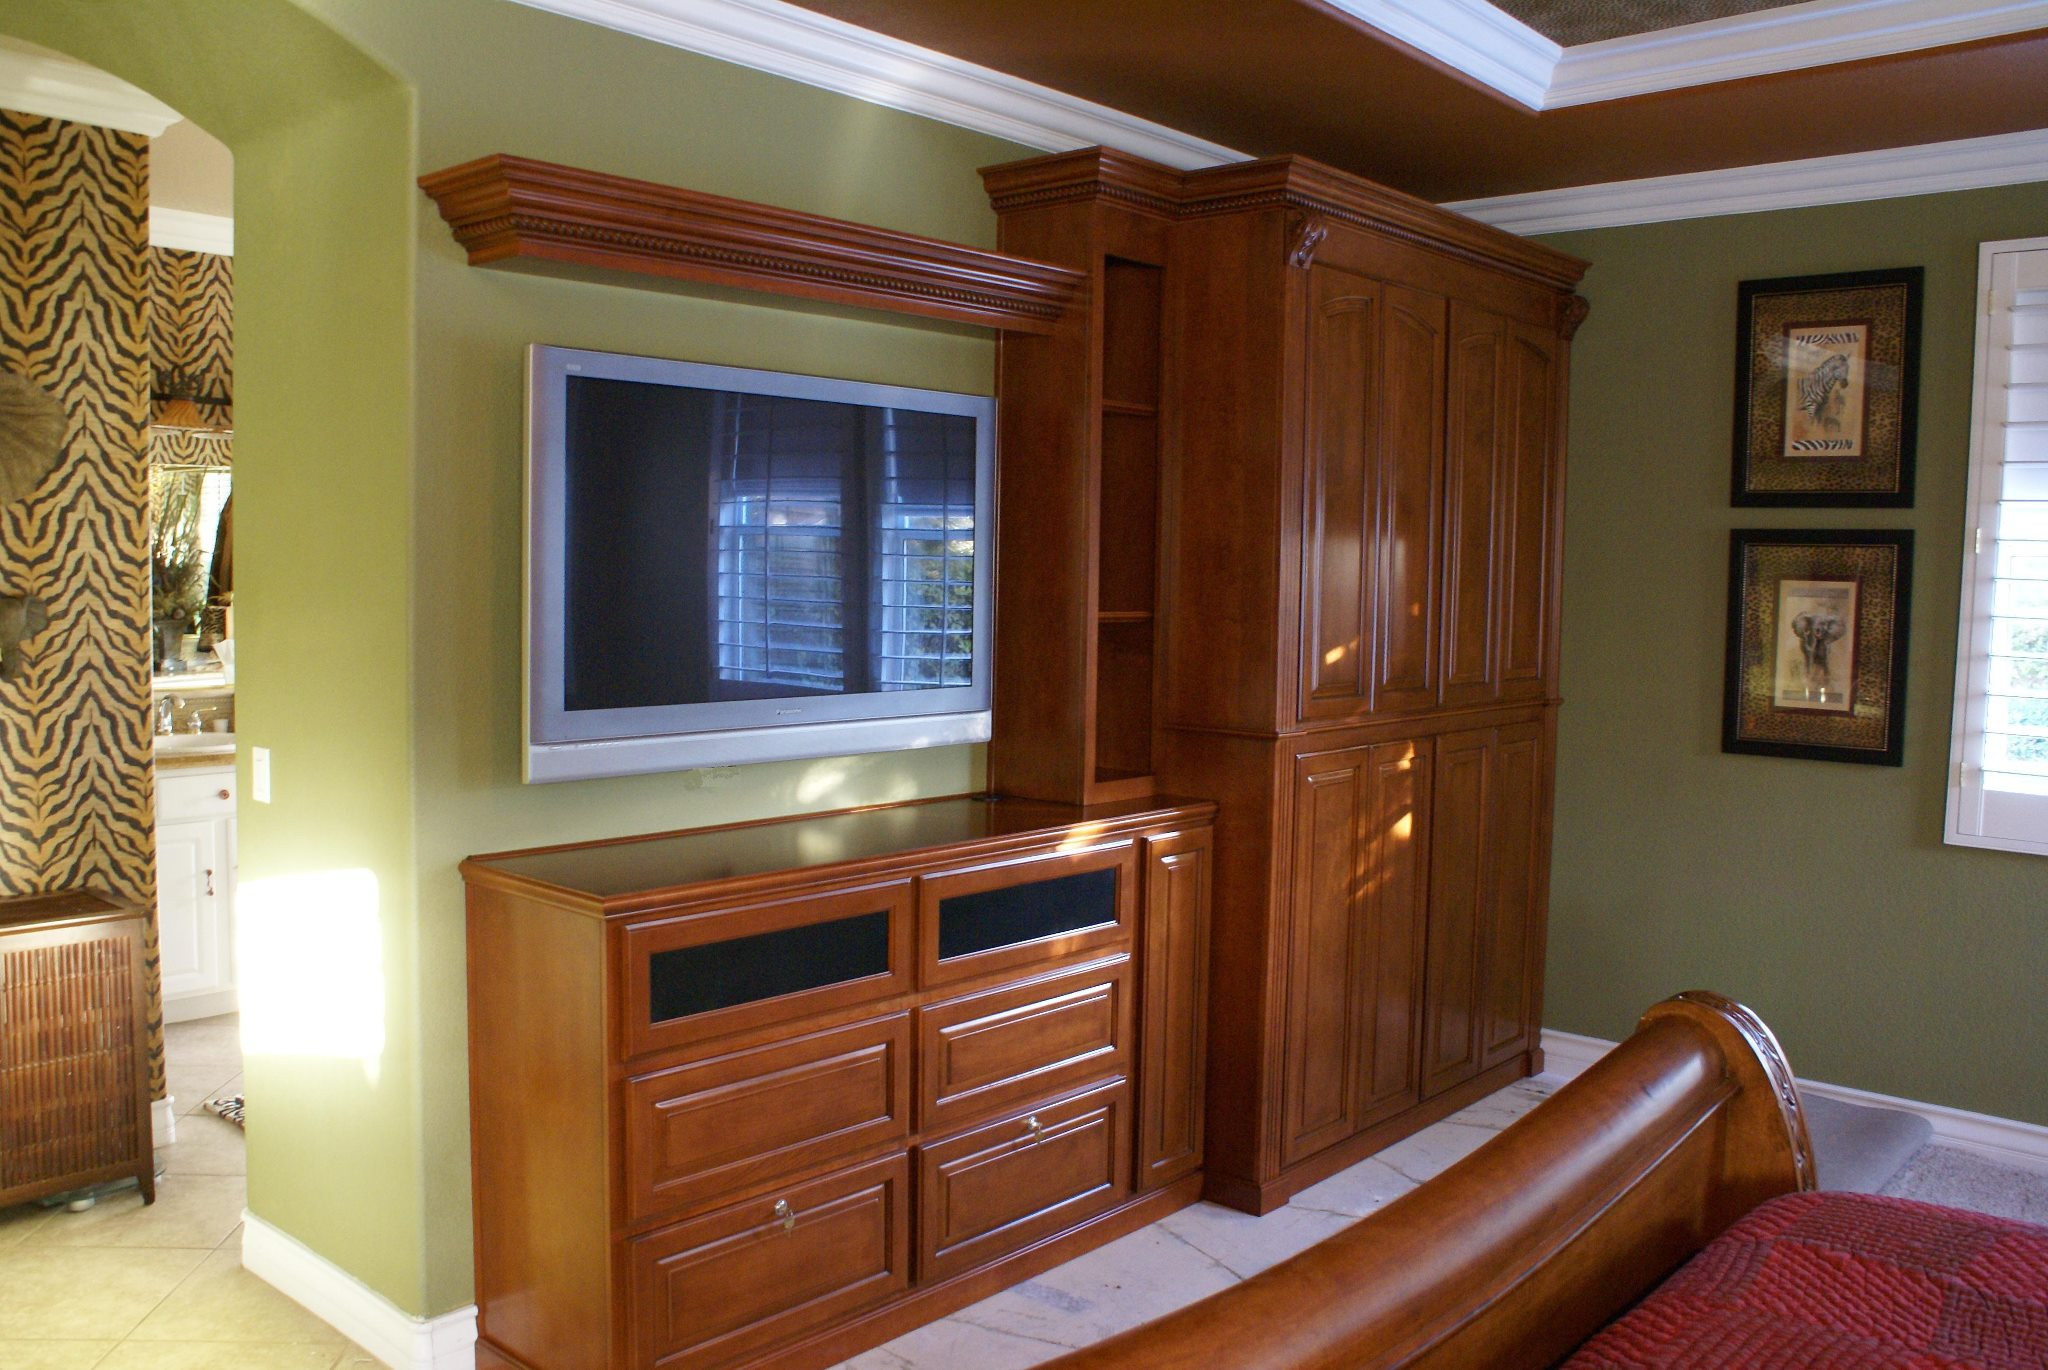 Bedroom Cabinet Ideas
 Built In Entertainment Centers & Custom Wall Unit Cabinets